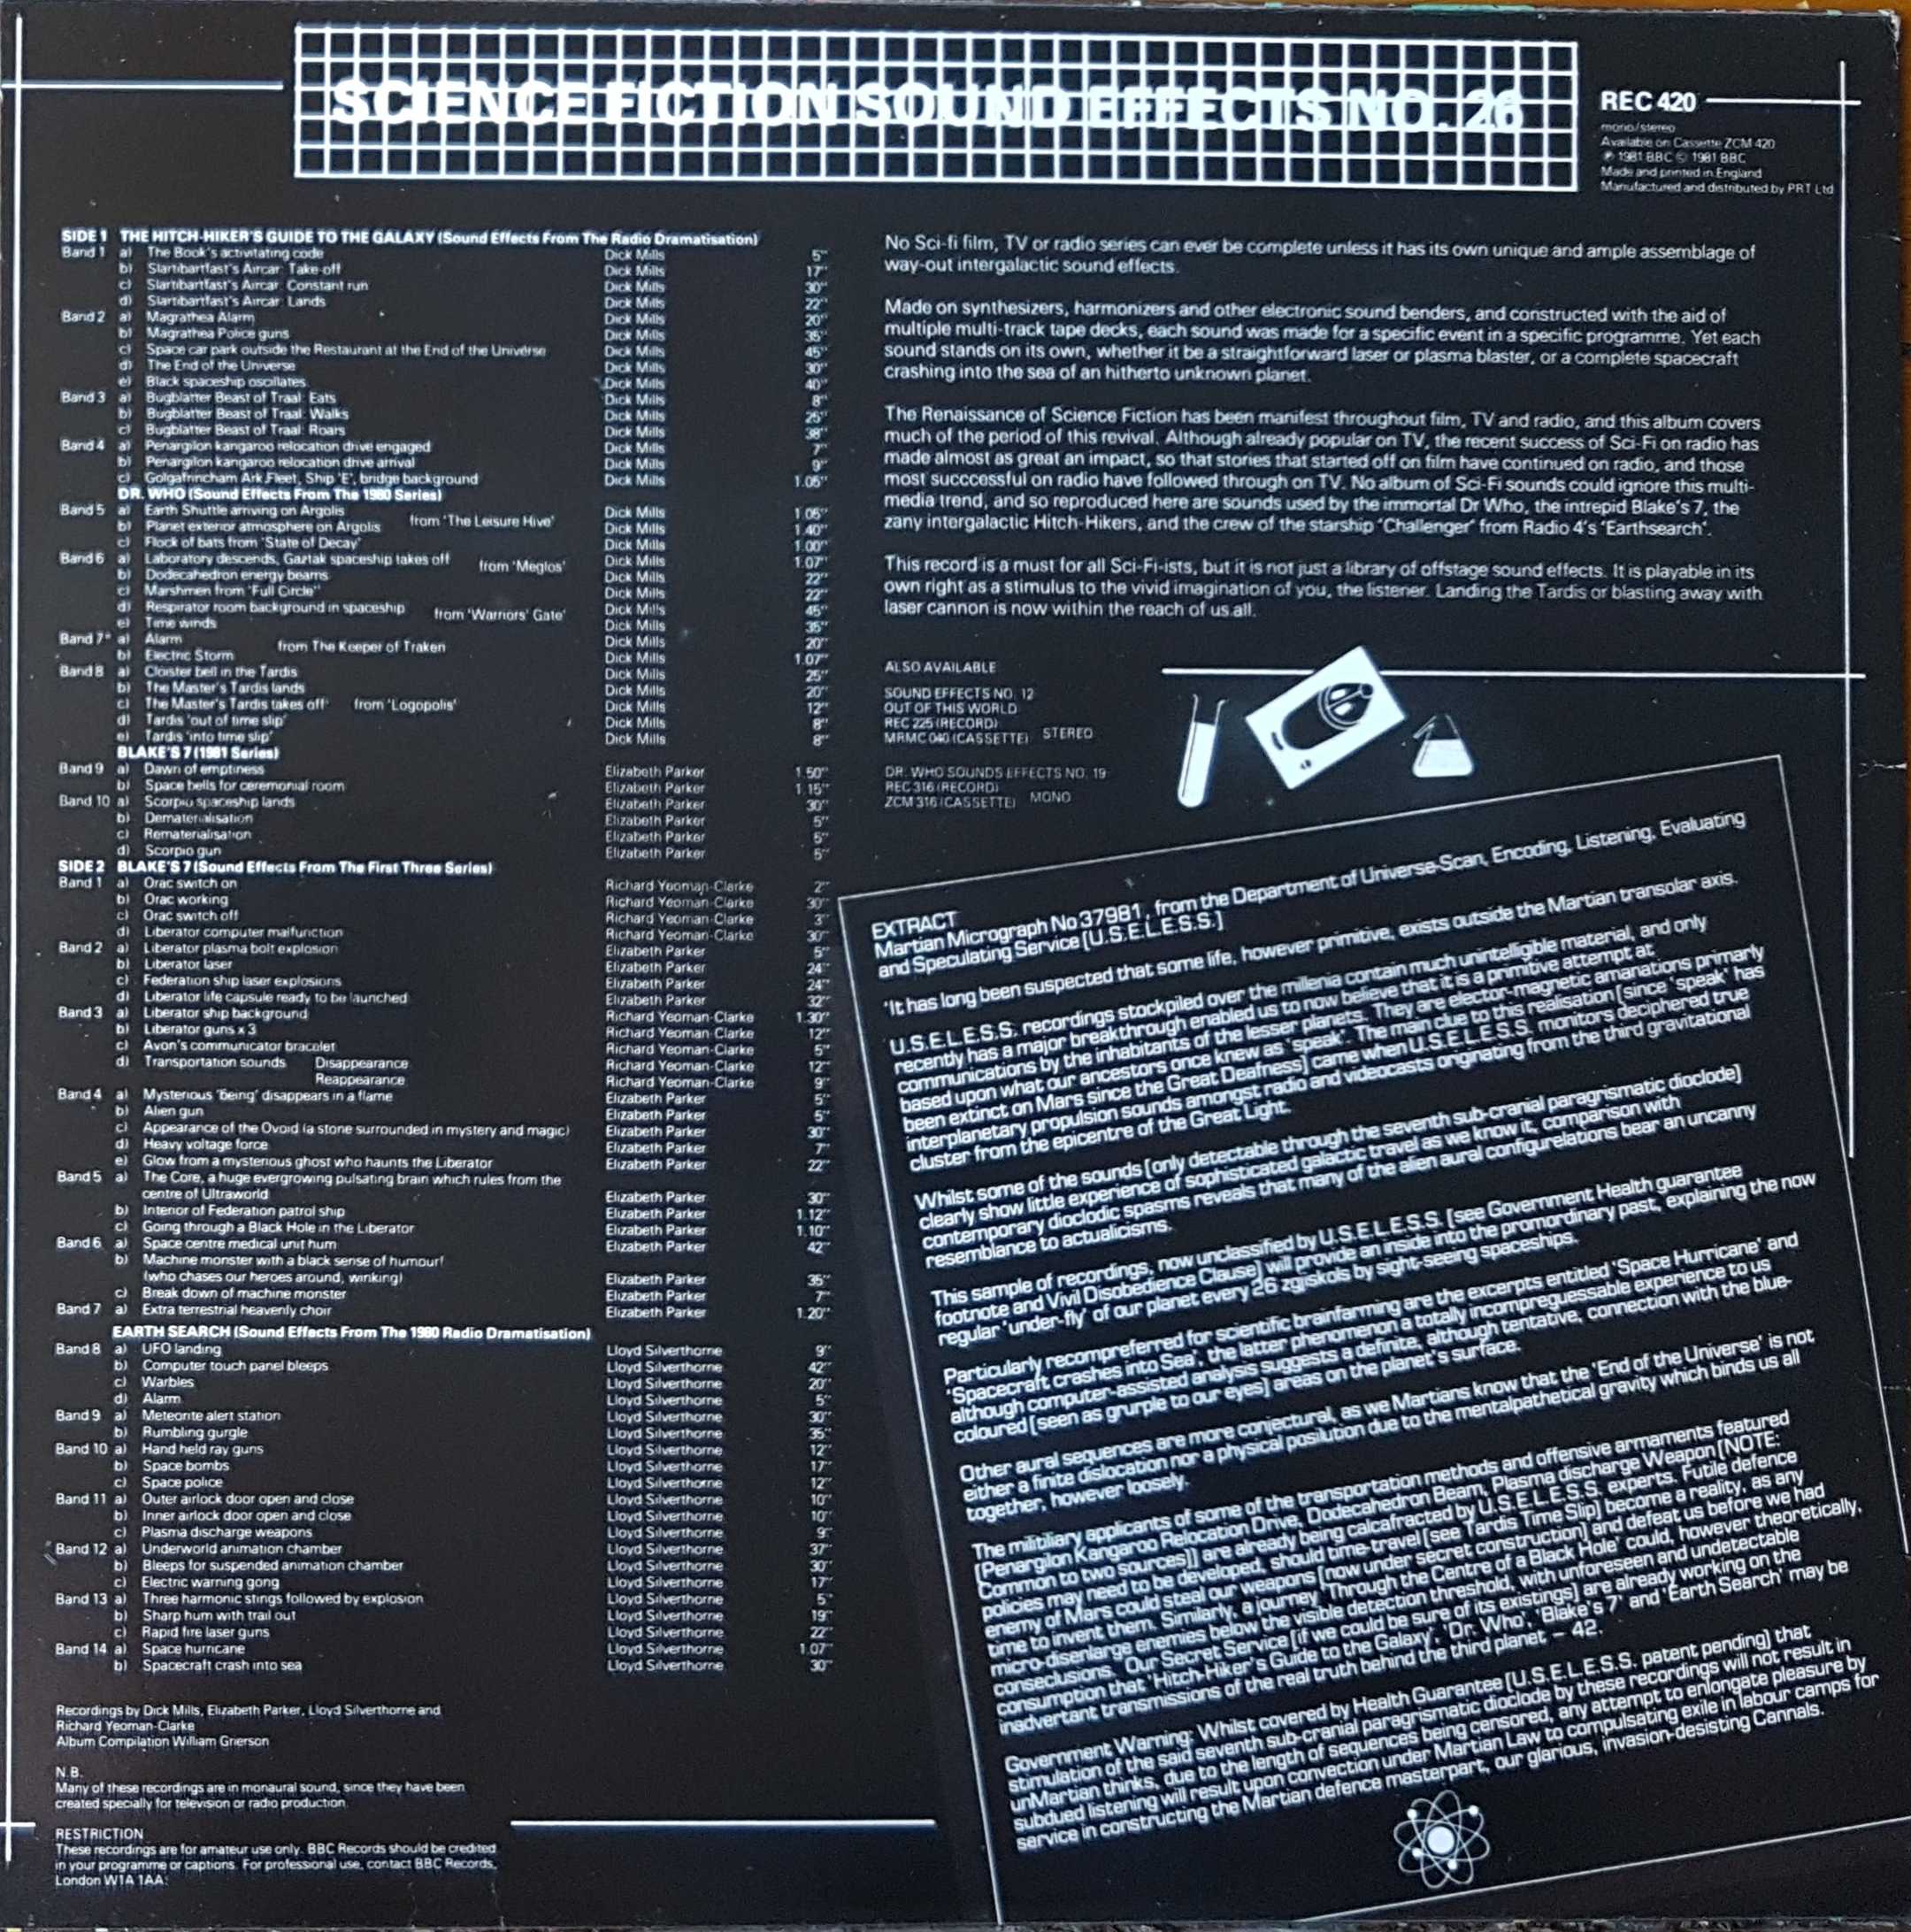 Picture of REC 420 Science fiction sound effects by artist Various from the BBC records and Tapes library